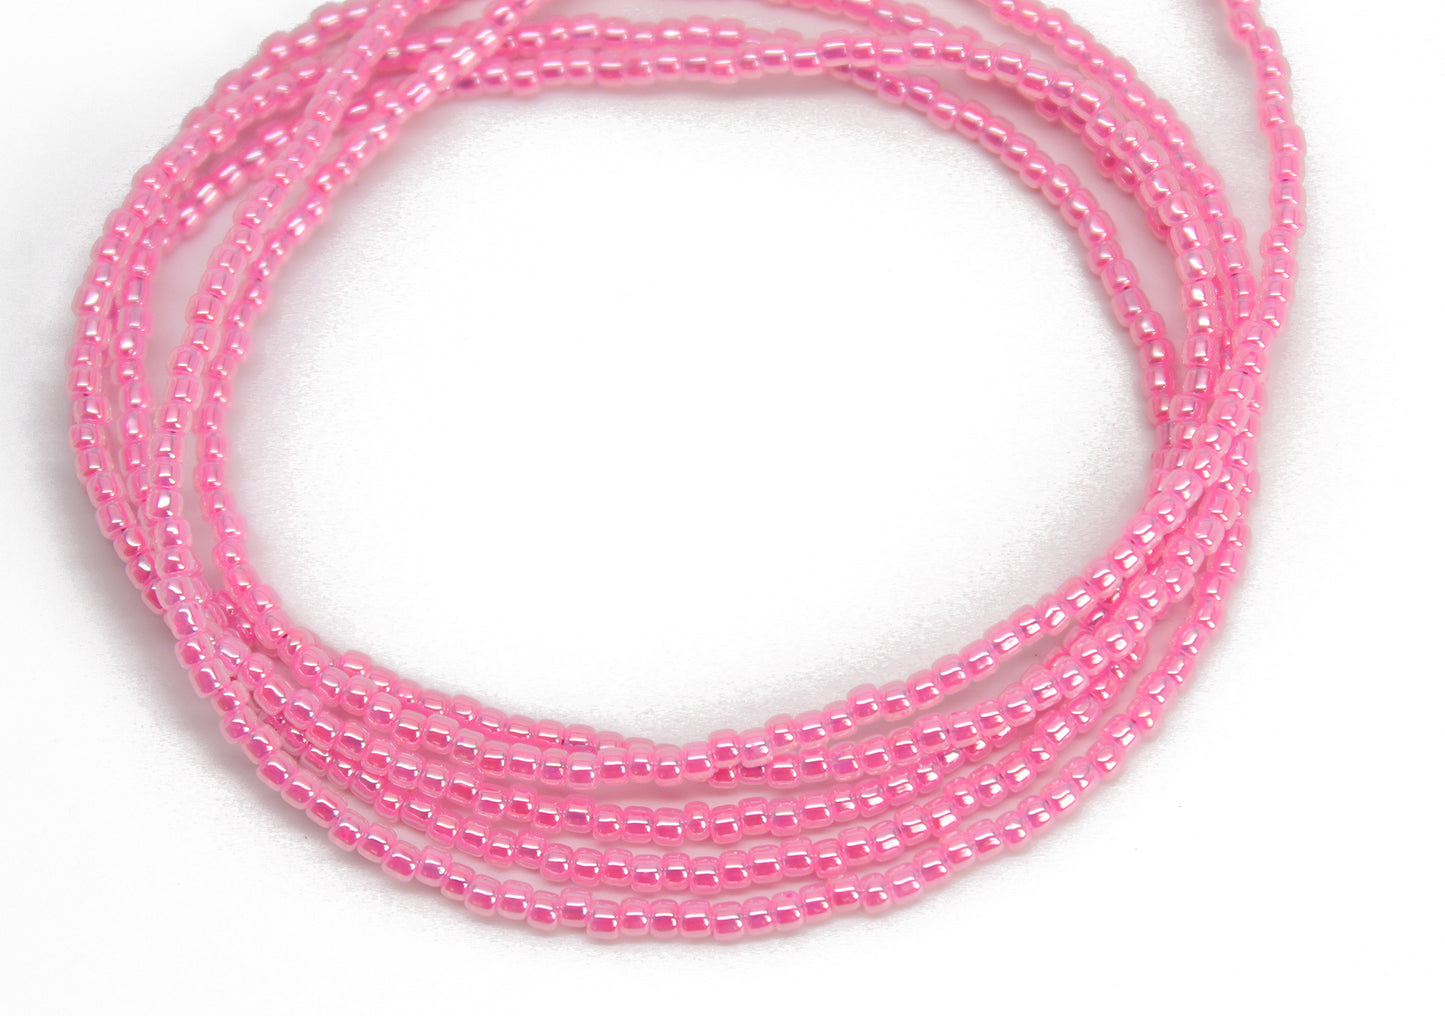 Hot Pink Seed Bead Necklace, Thin 1.5mm Single Strand Beaded Necklace